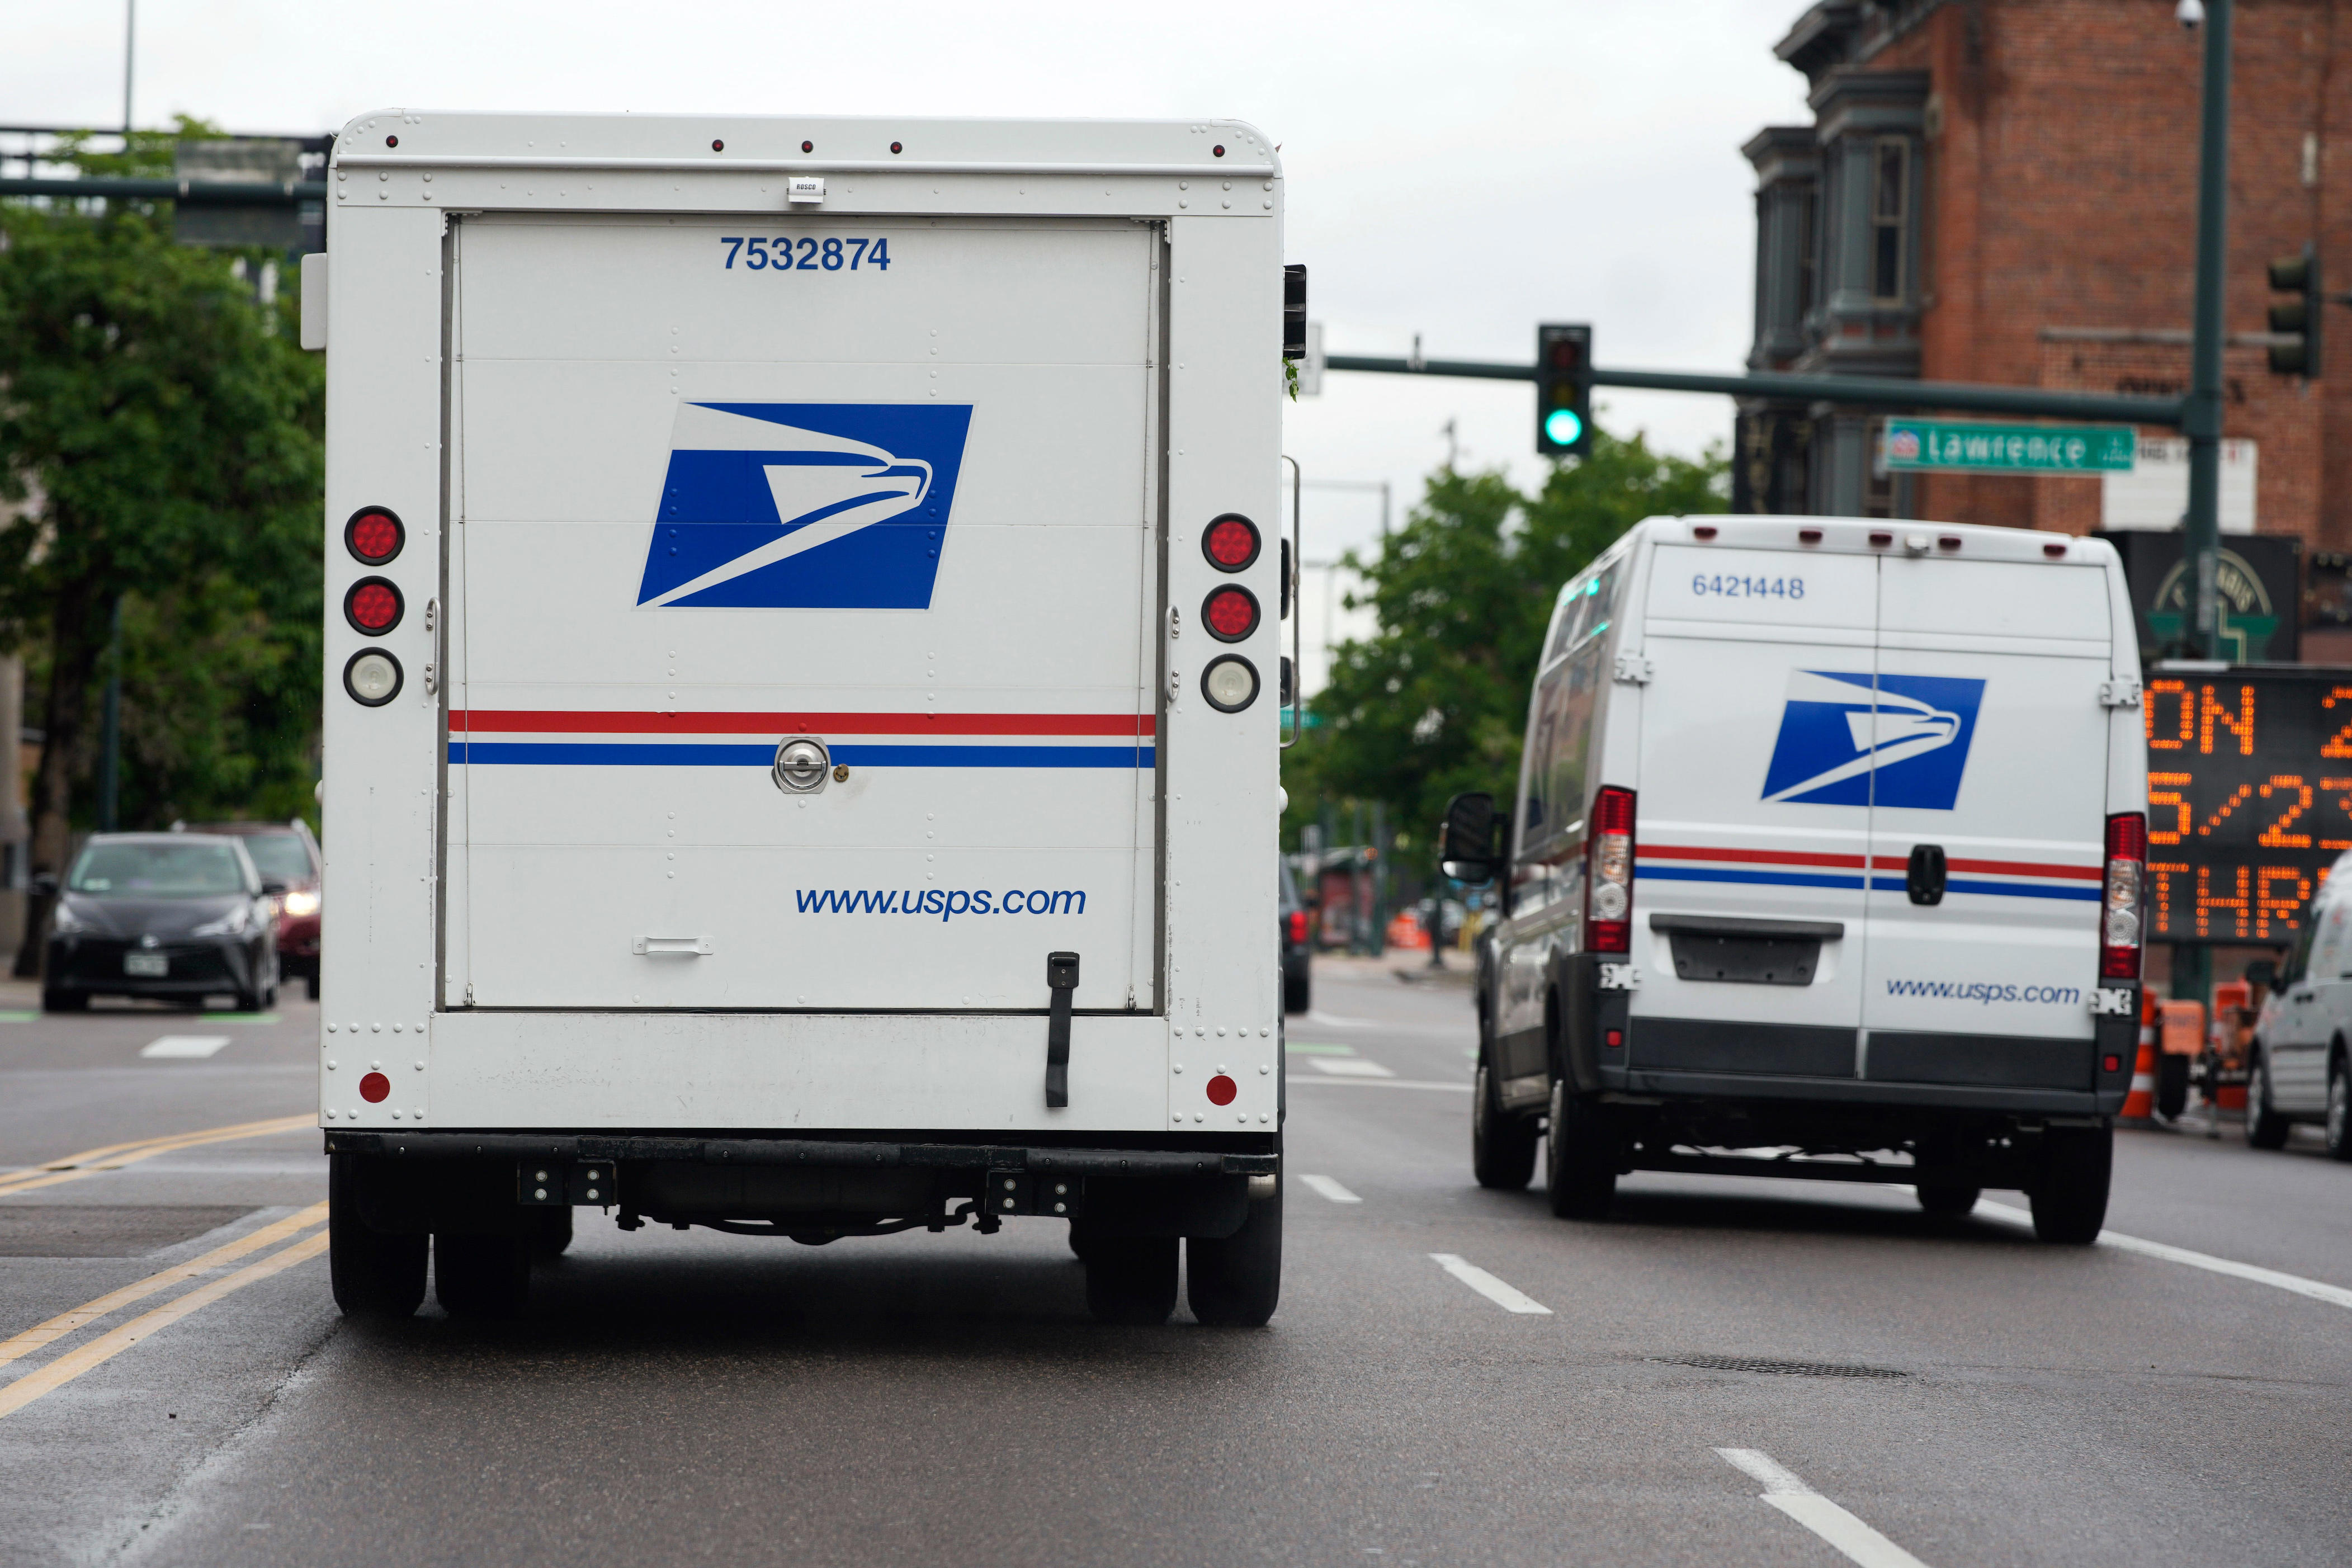 The cost to mail a letter is going up again. Here's what you need to